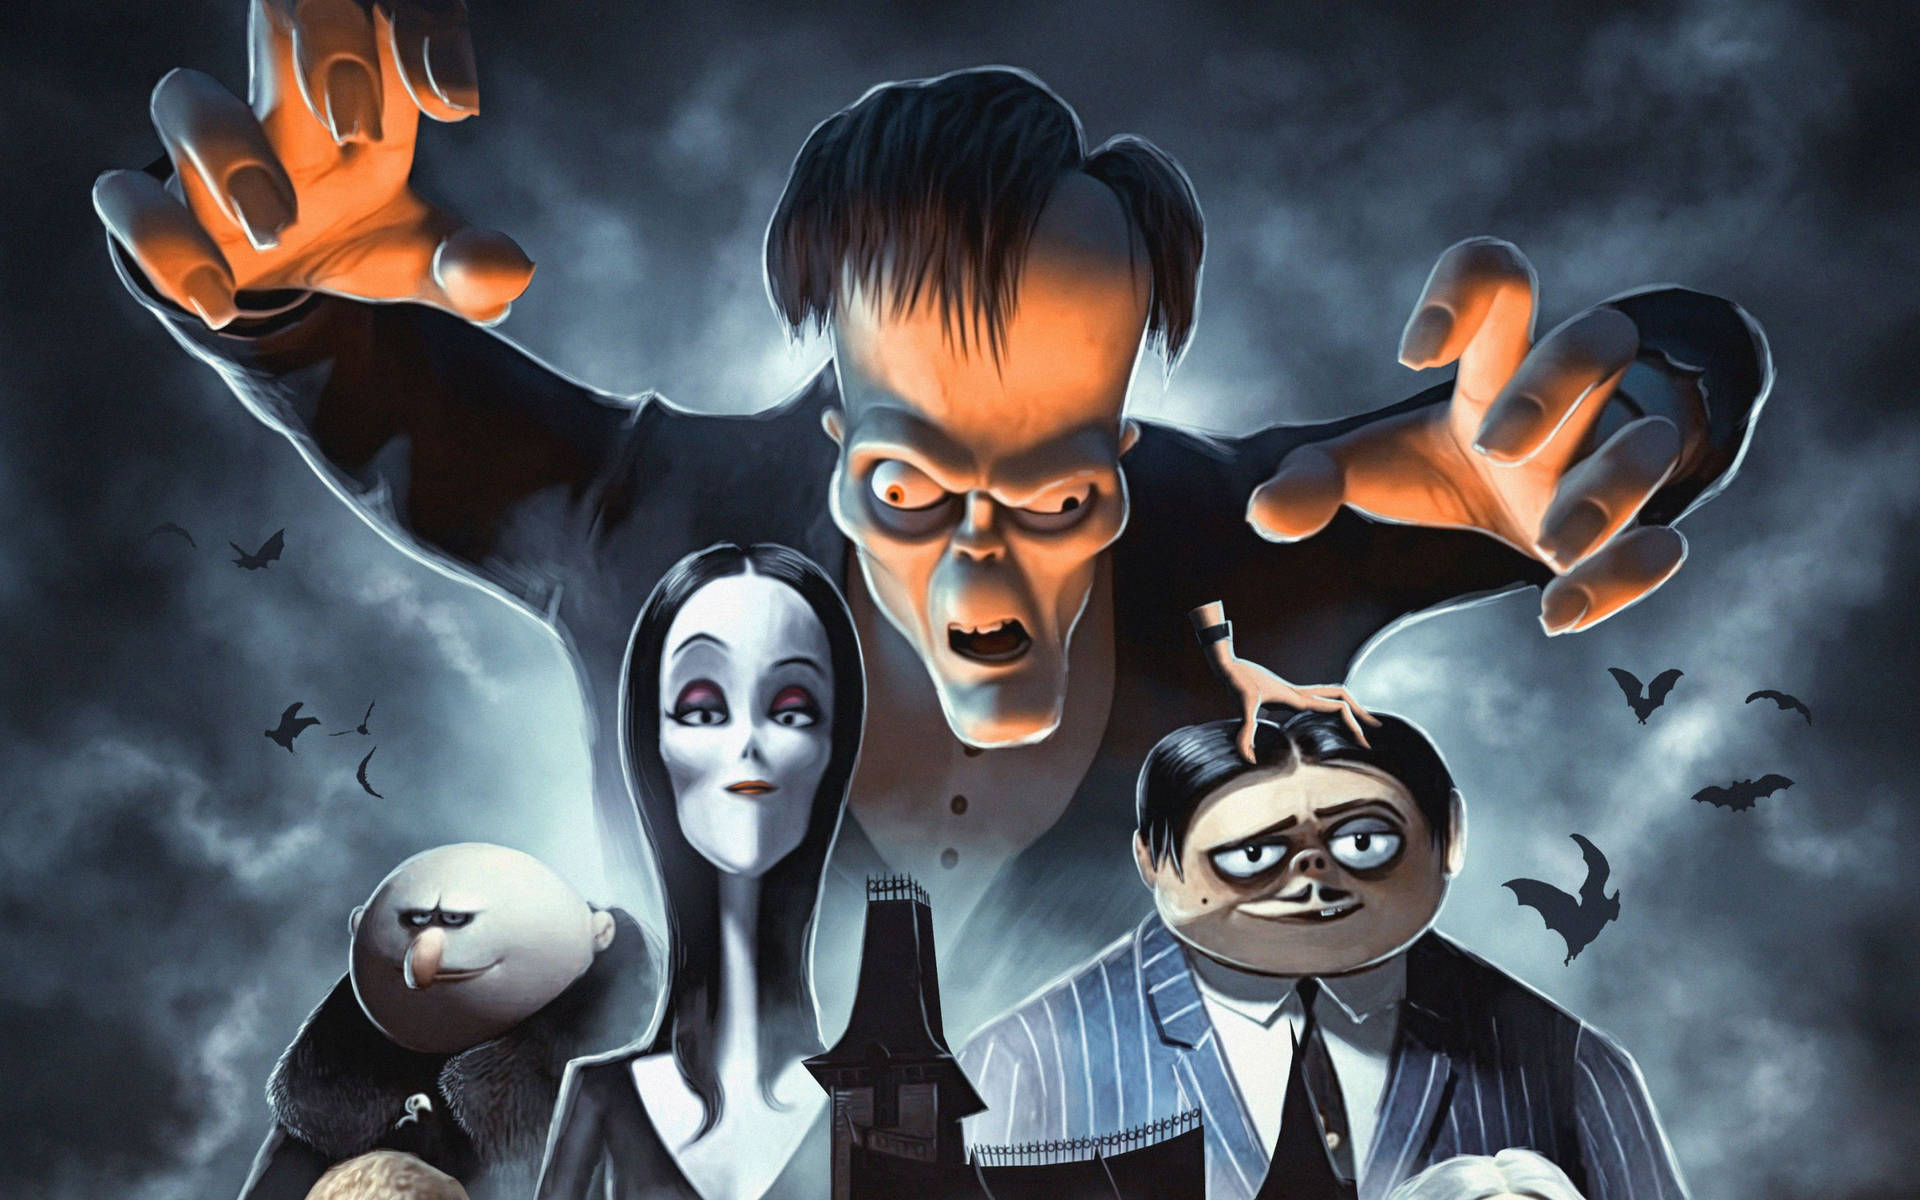 Lurchdroht Bei The Addams Family 2. Wallpaper